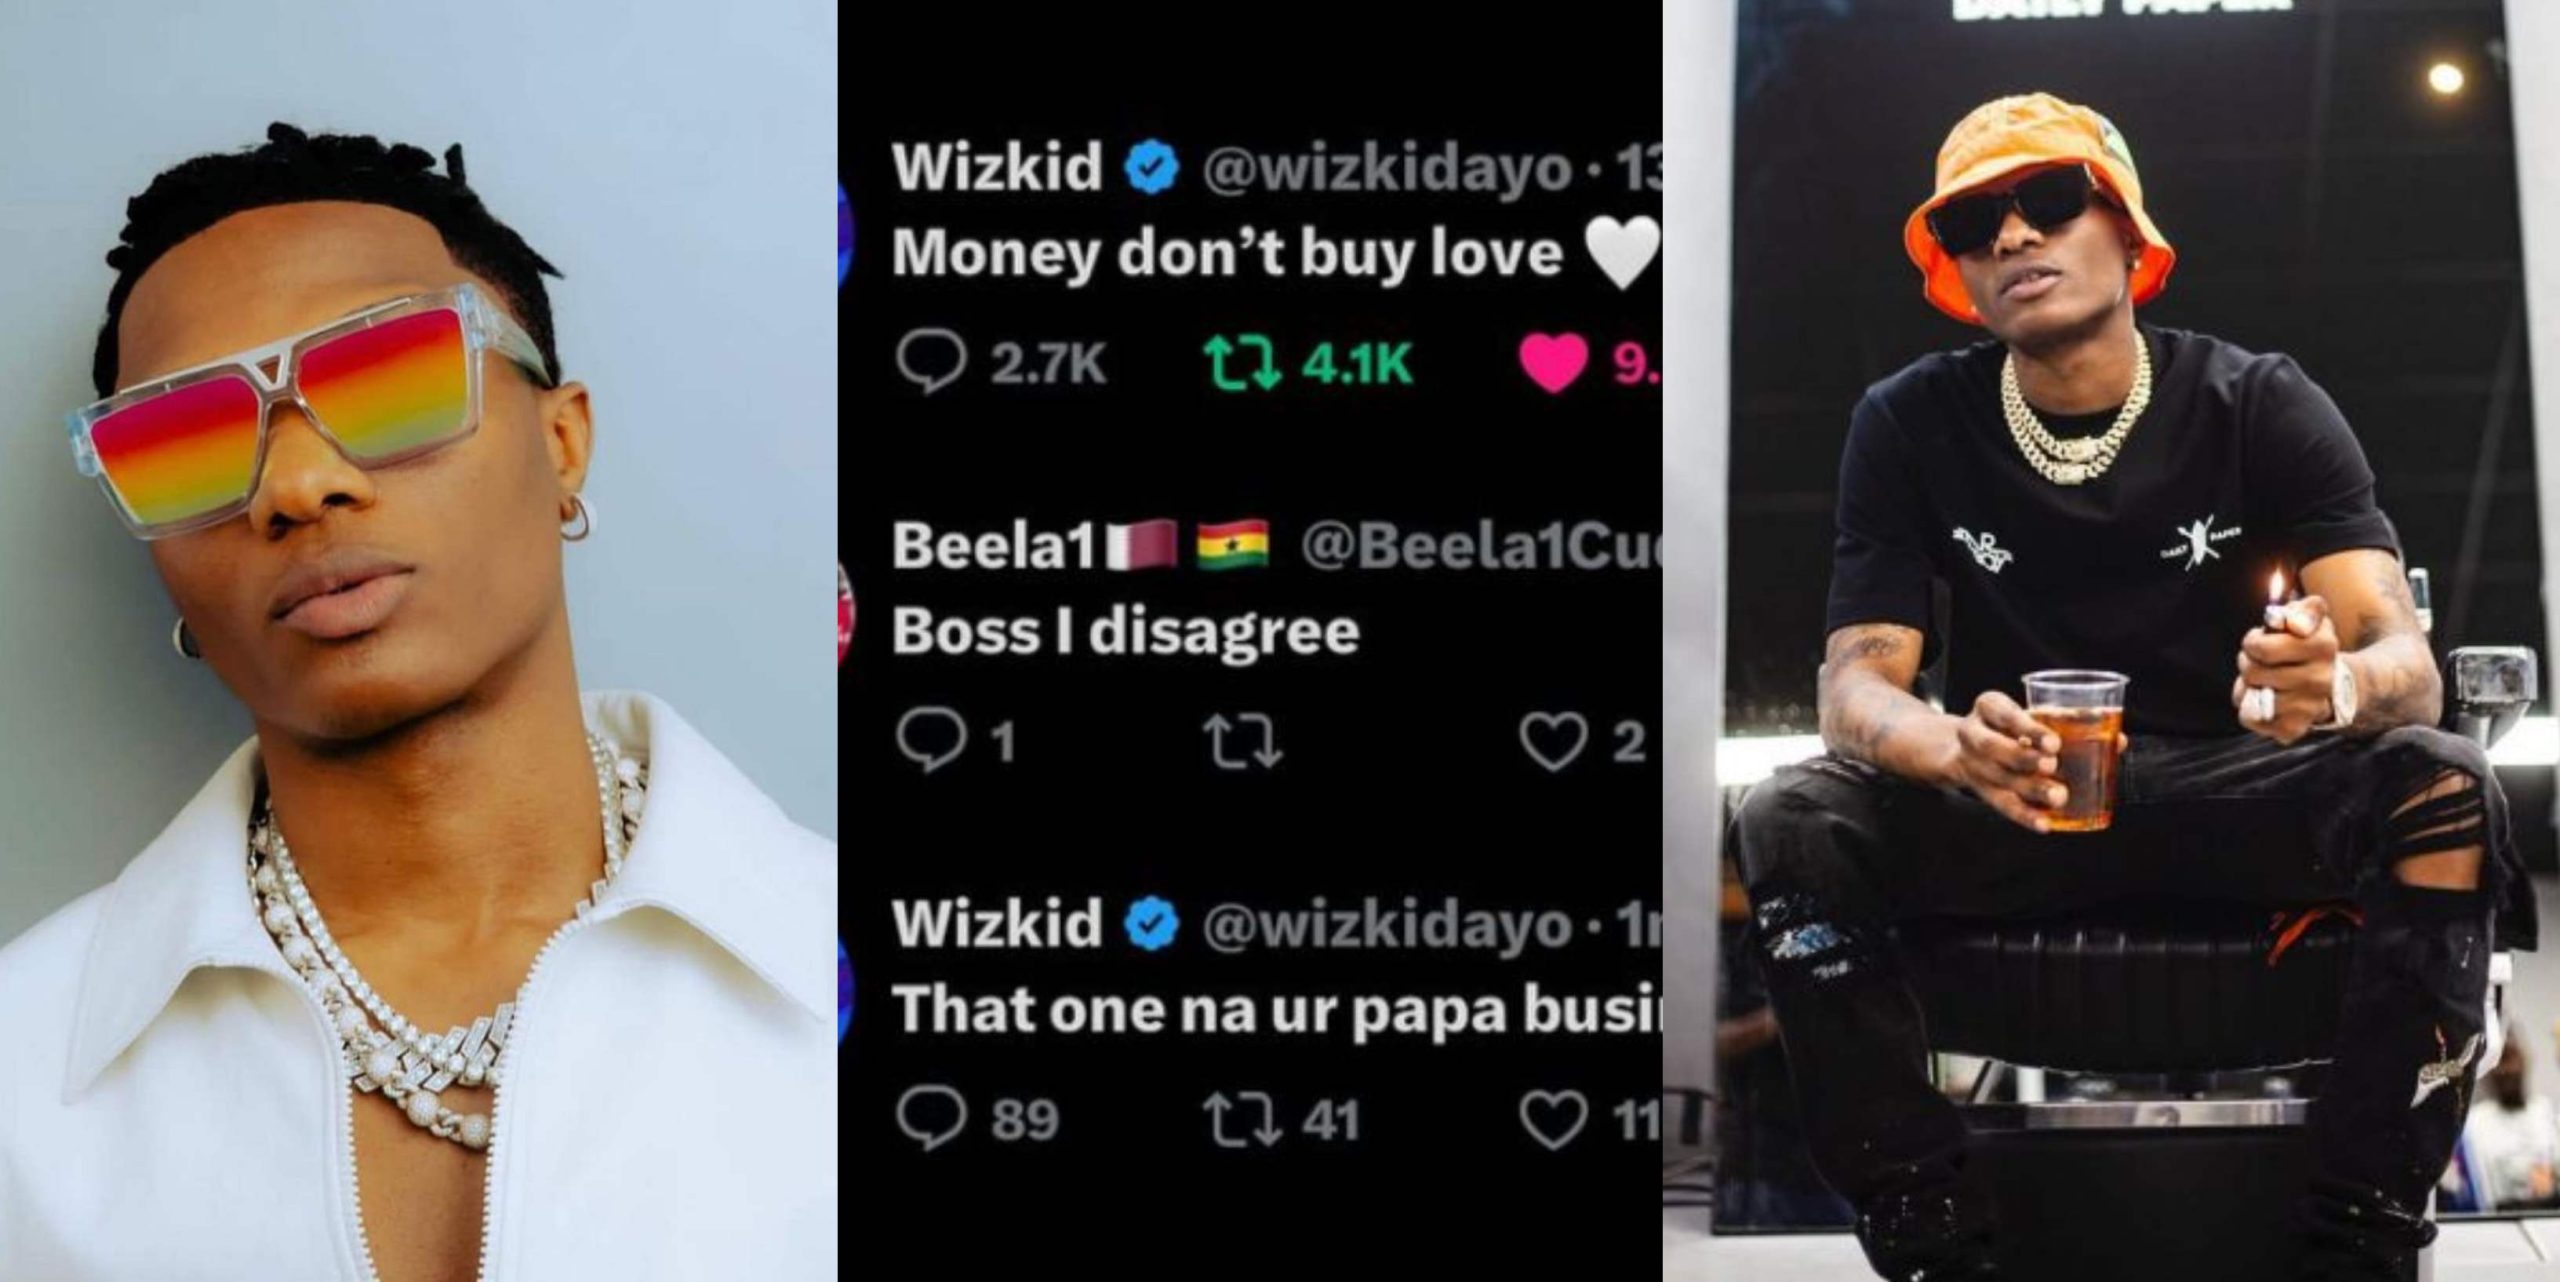 Moment singer Wizkid blasts fan who disagreed with his statement “Money don’t buy love”